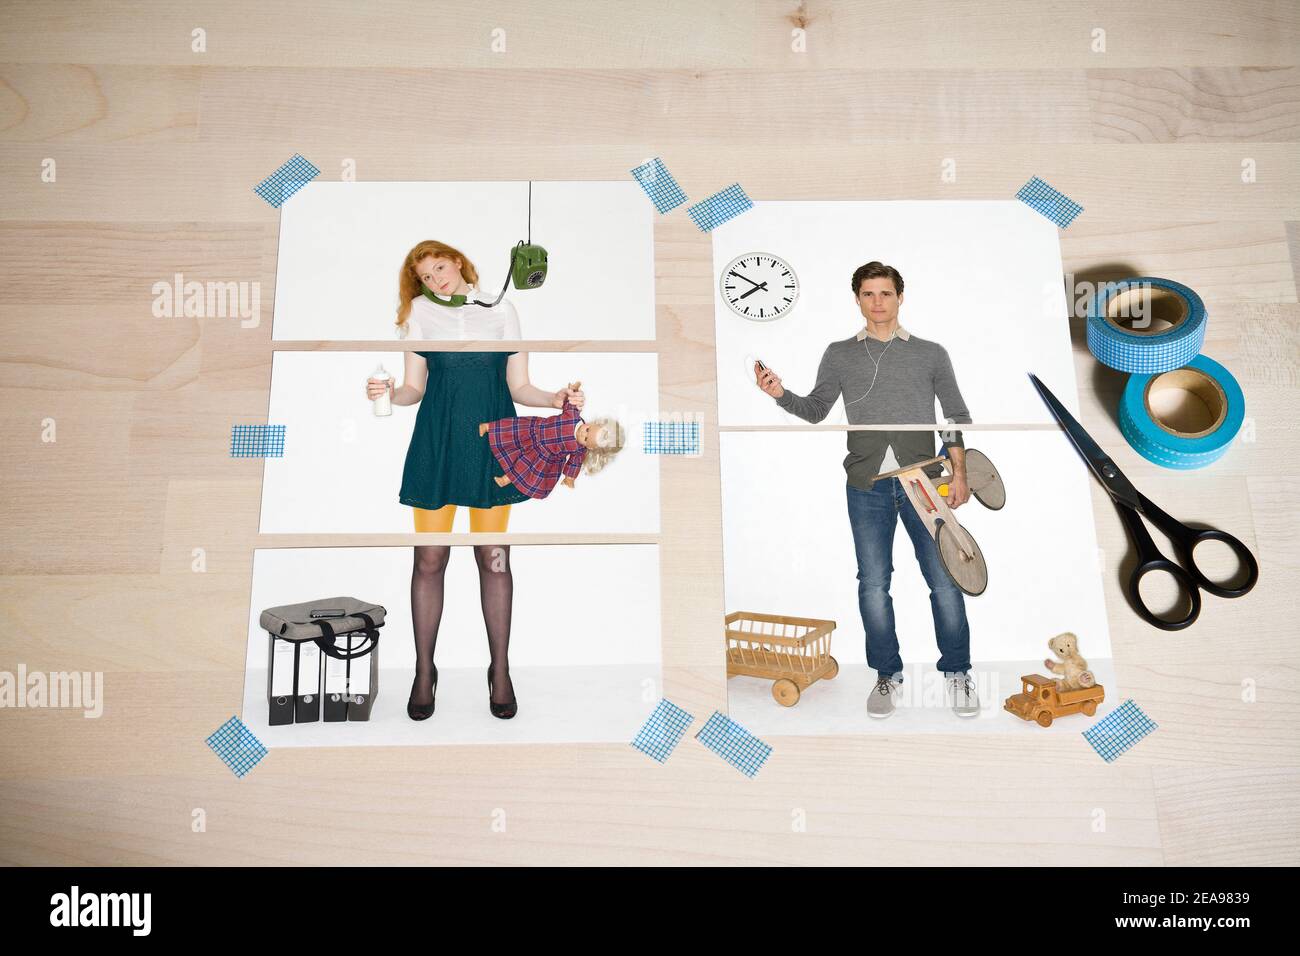 Collage of woman and man in different roles, stuck on table, with scissors, tape Stock Photo